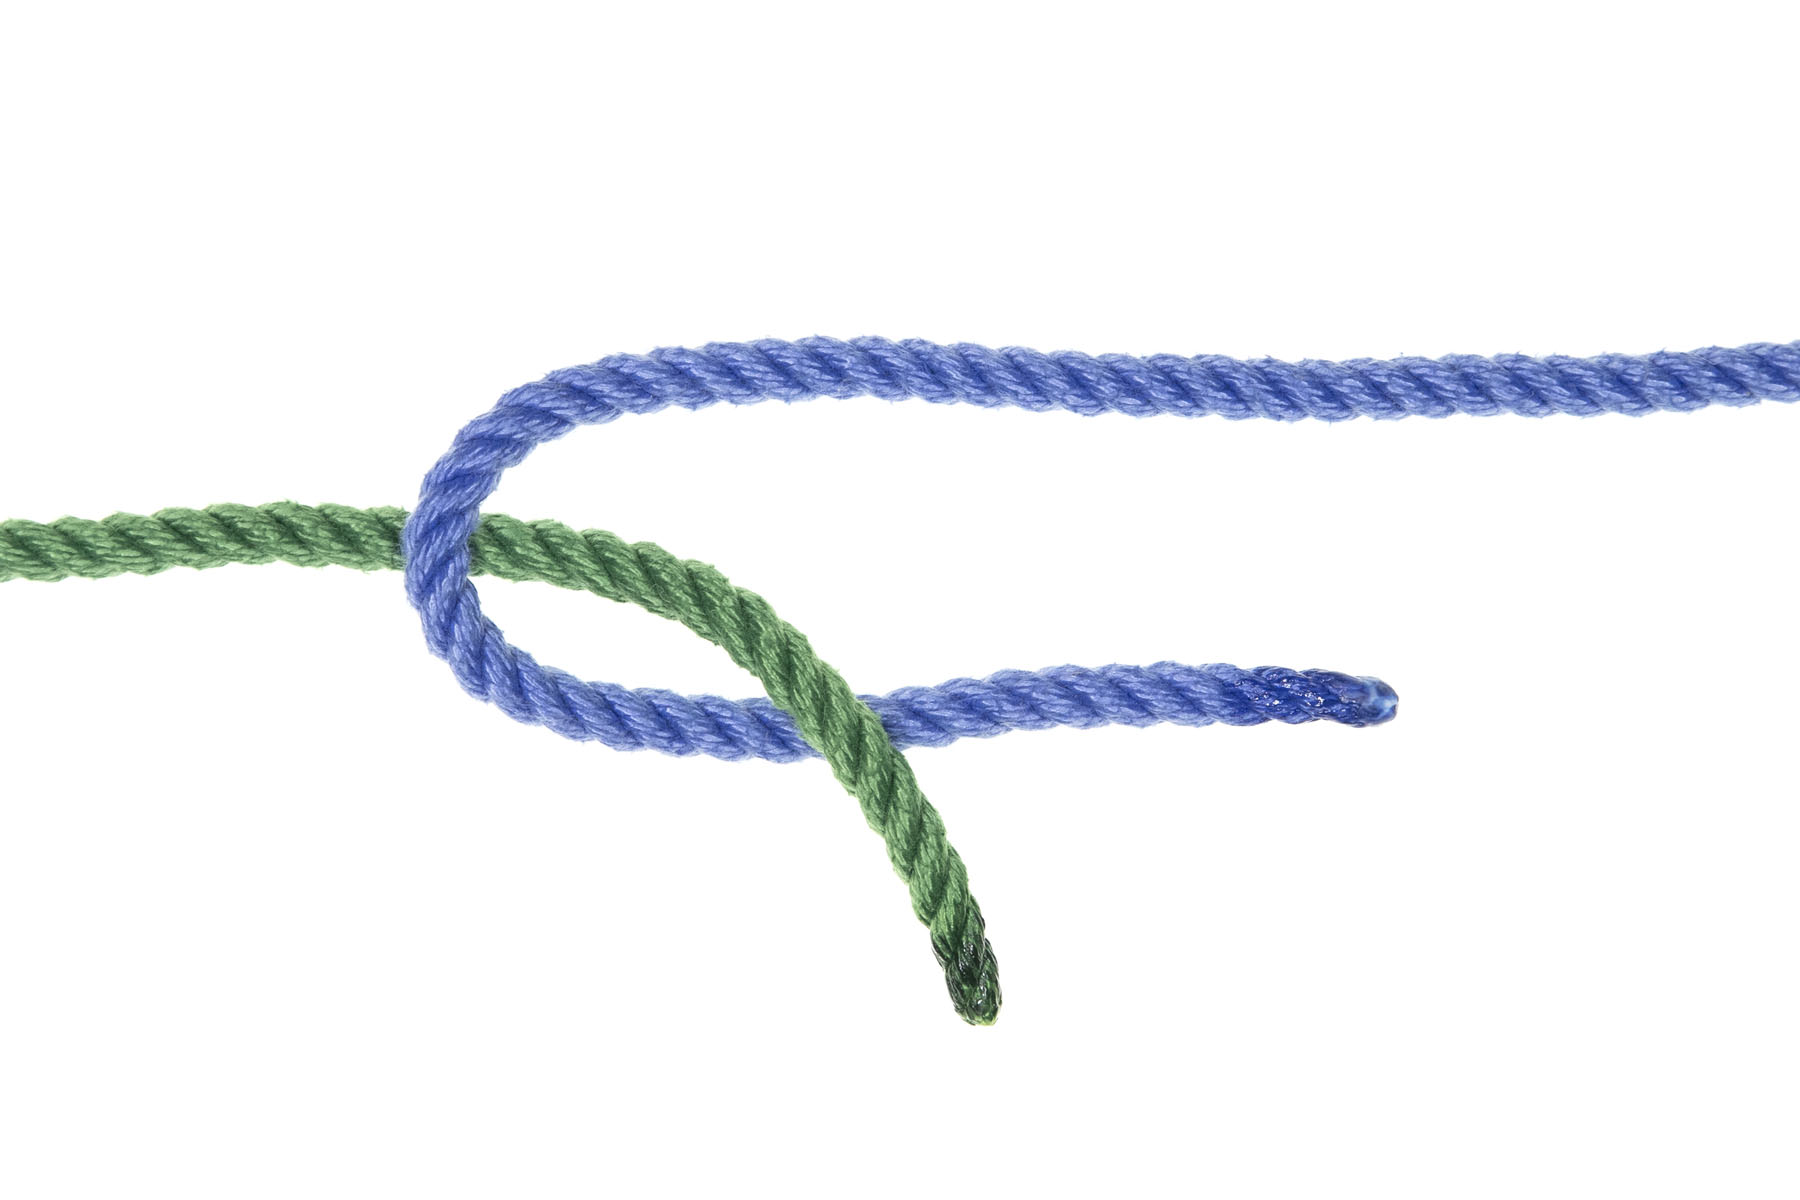 A single green rope enters from the right. It passes under the center of the turn in the blue rope, then bends down and crosses over the lower part of the blue rope.